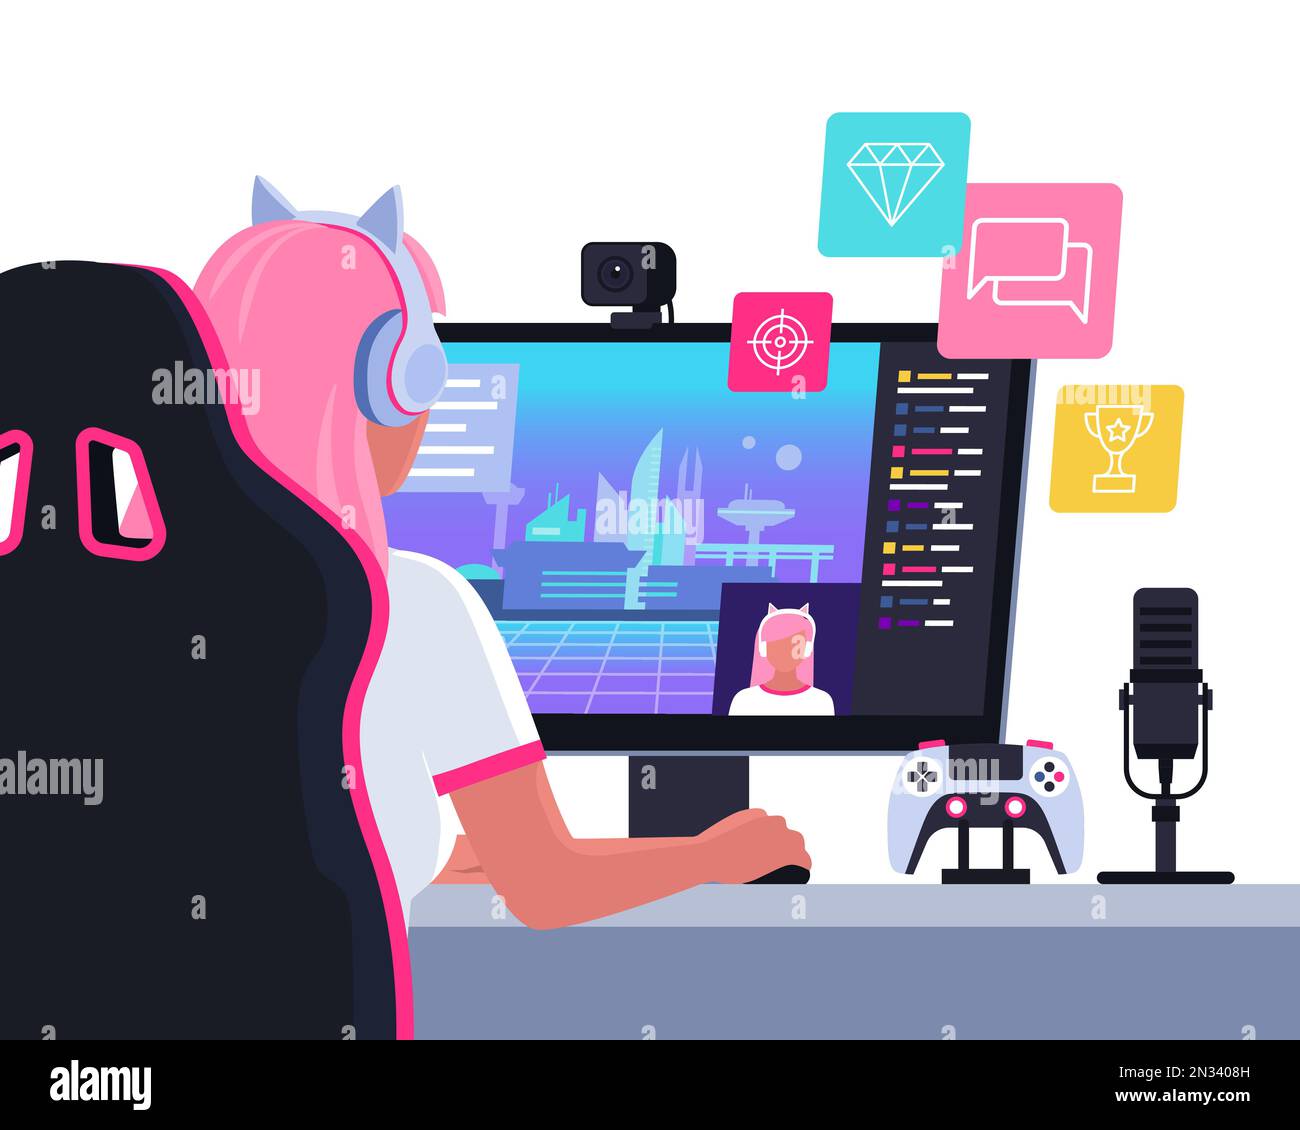 Professional cute gamer girl playing video games online: video games live streaming platform concept Stock Vector